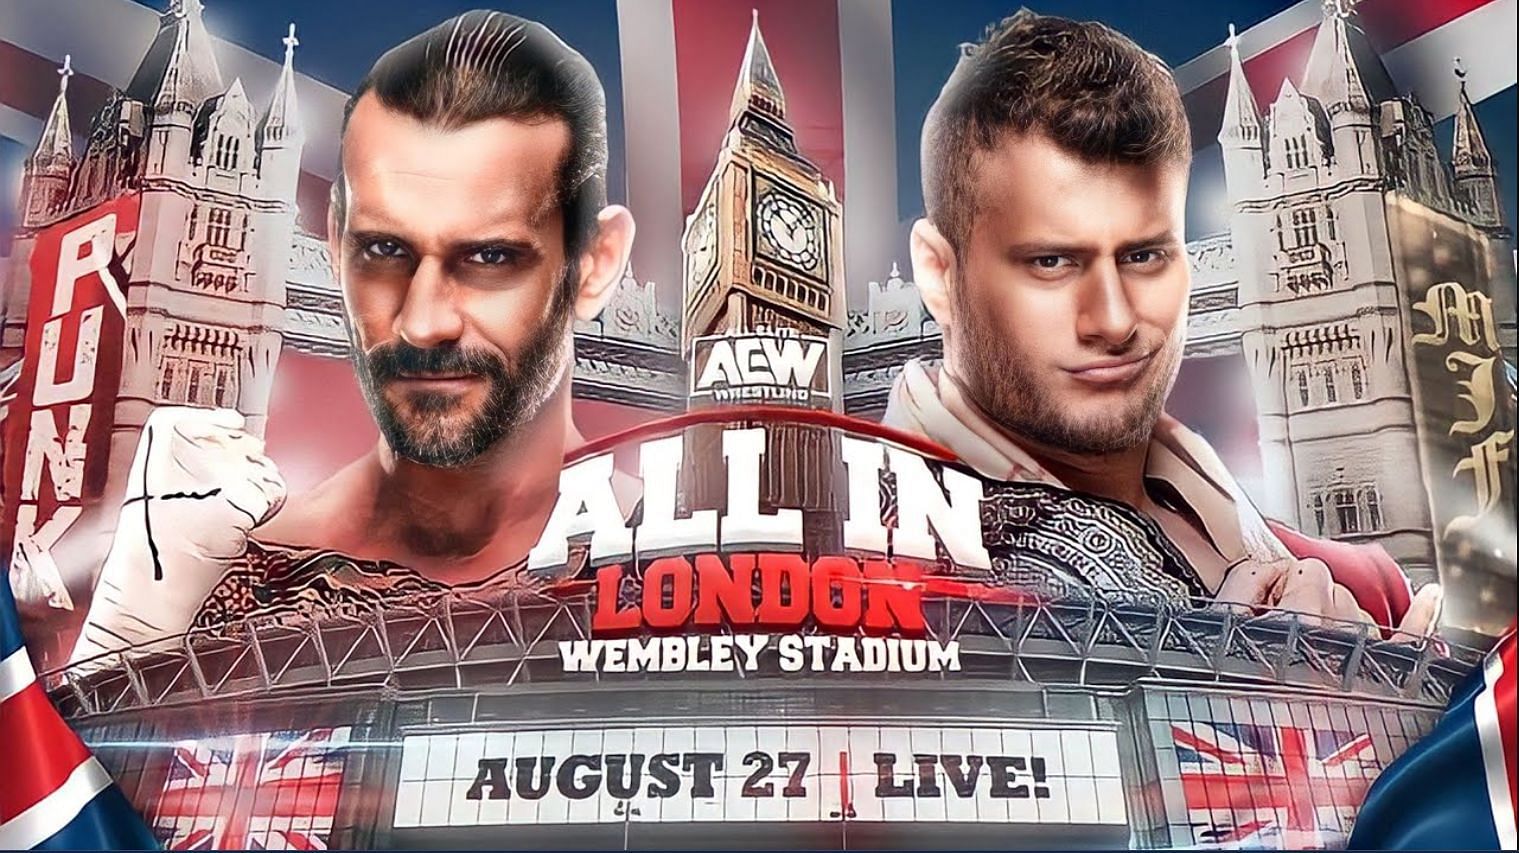 Could we see this main event at All In?